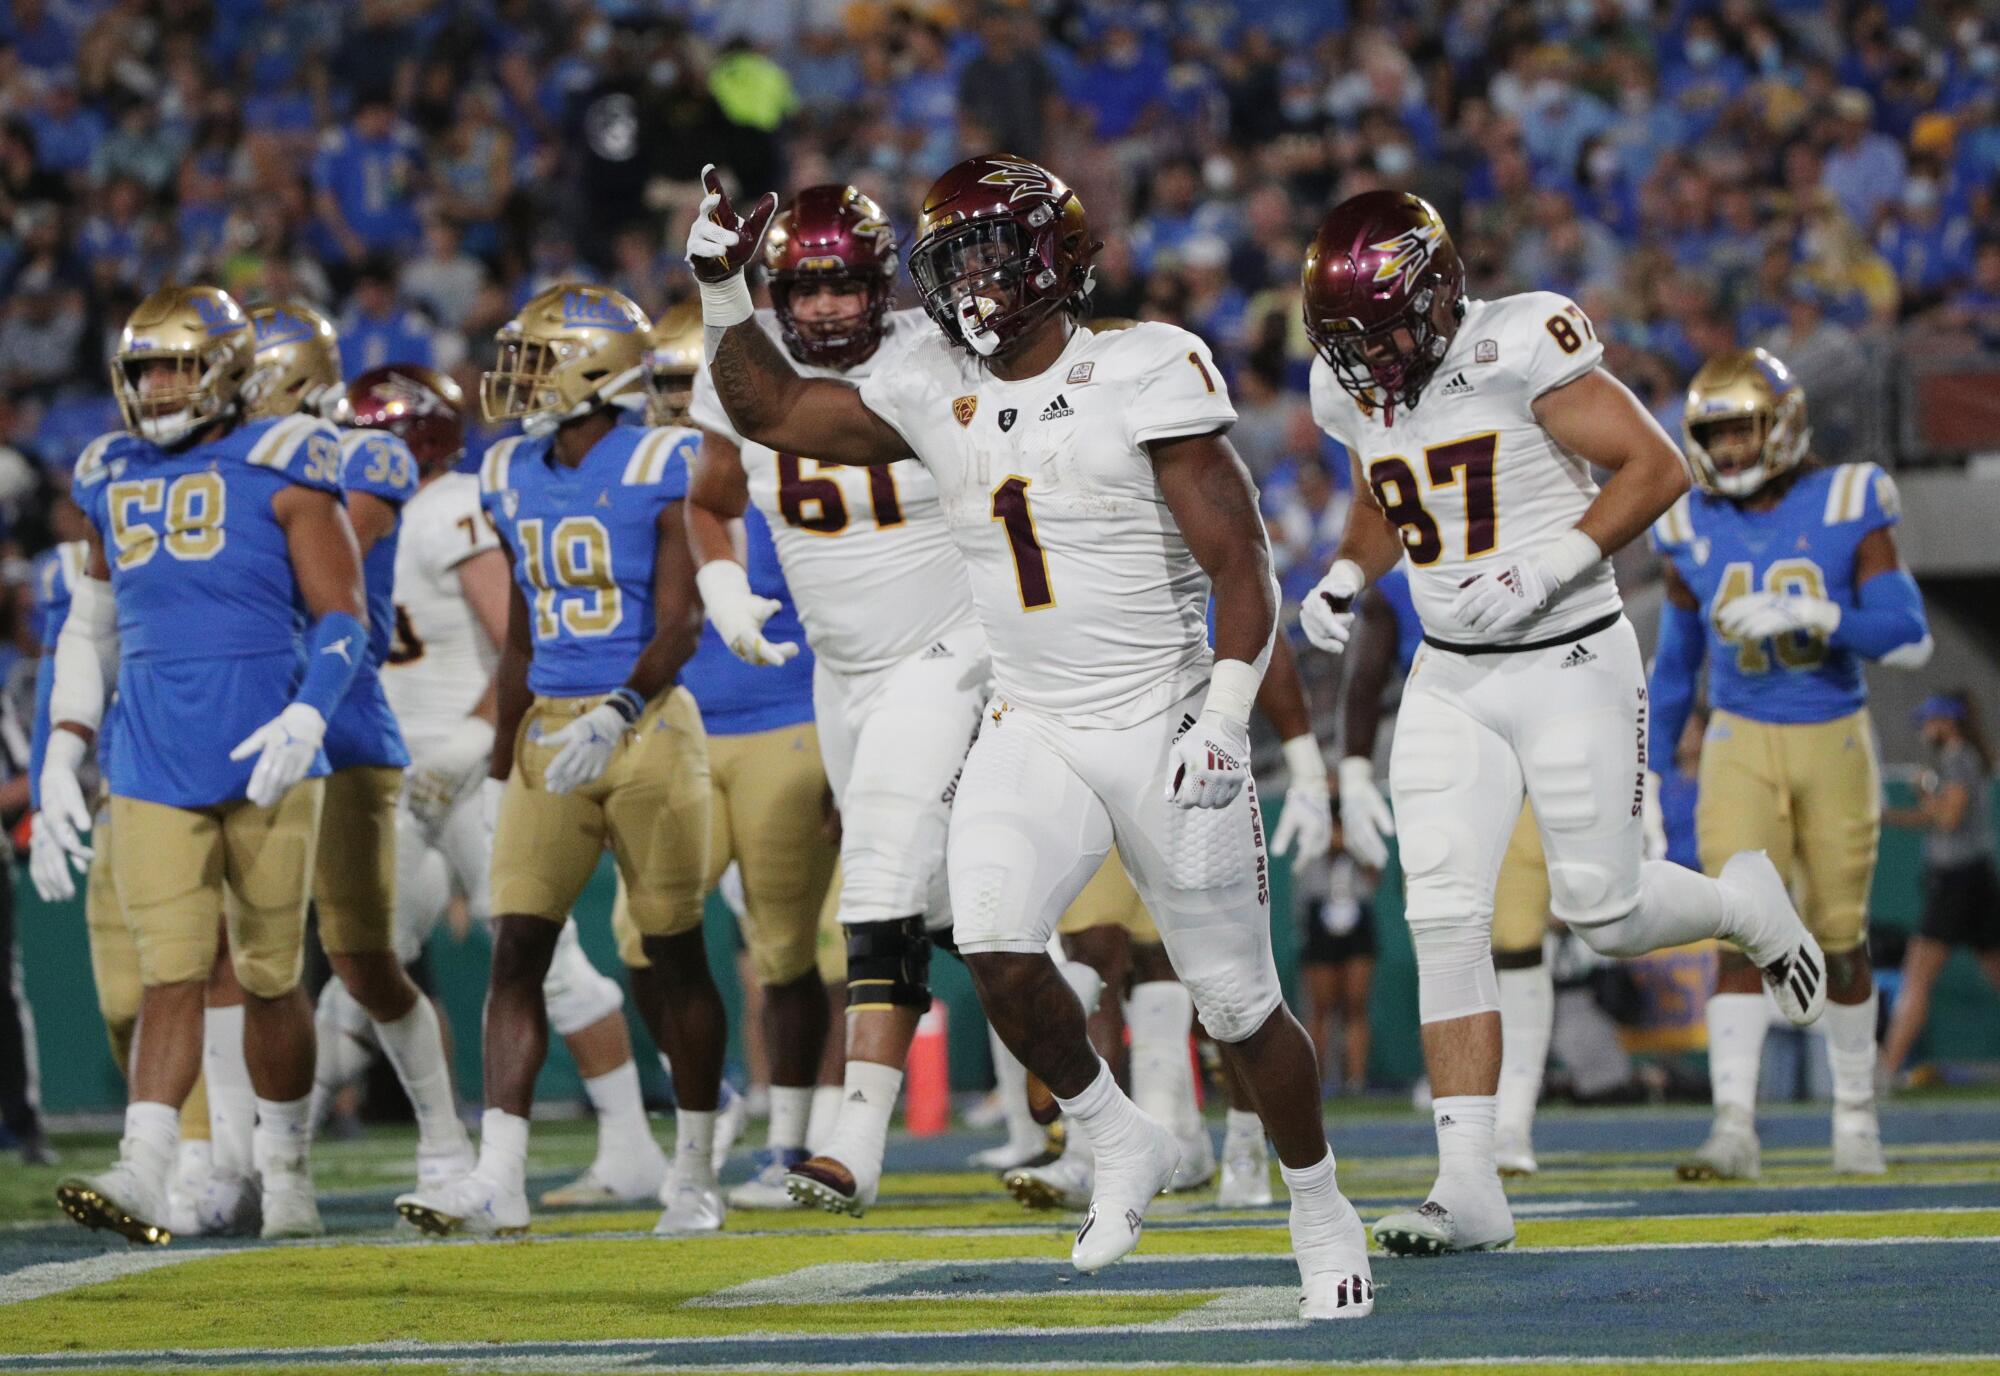 Arizona State running back DeaMonte Trayanum celebrates after scoring a first-half touchdown against UCLA.